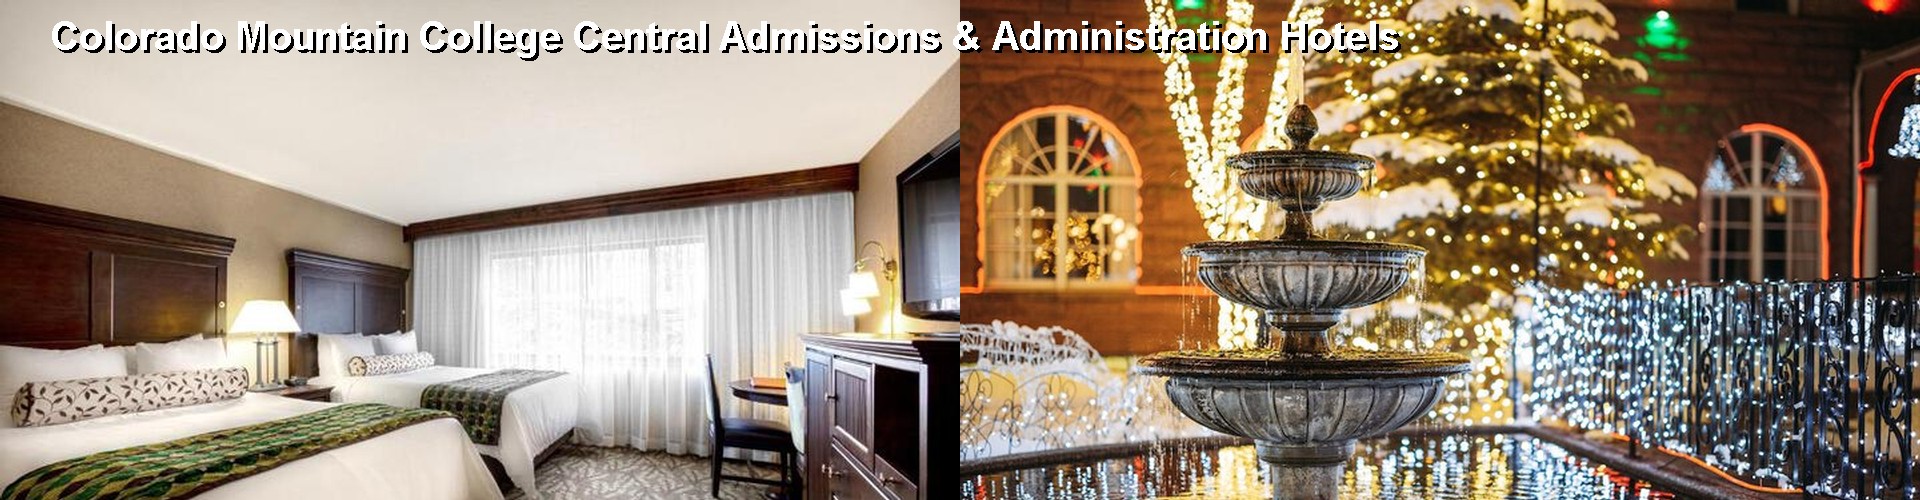 5 Best Hotels near Colorado Mountain College Central Admissions & Administration